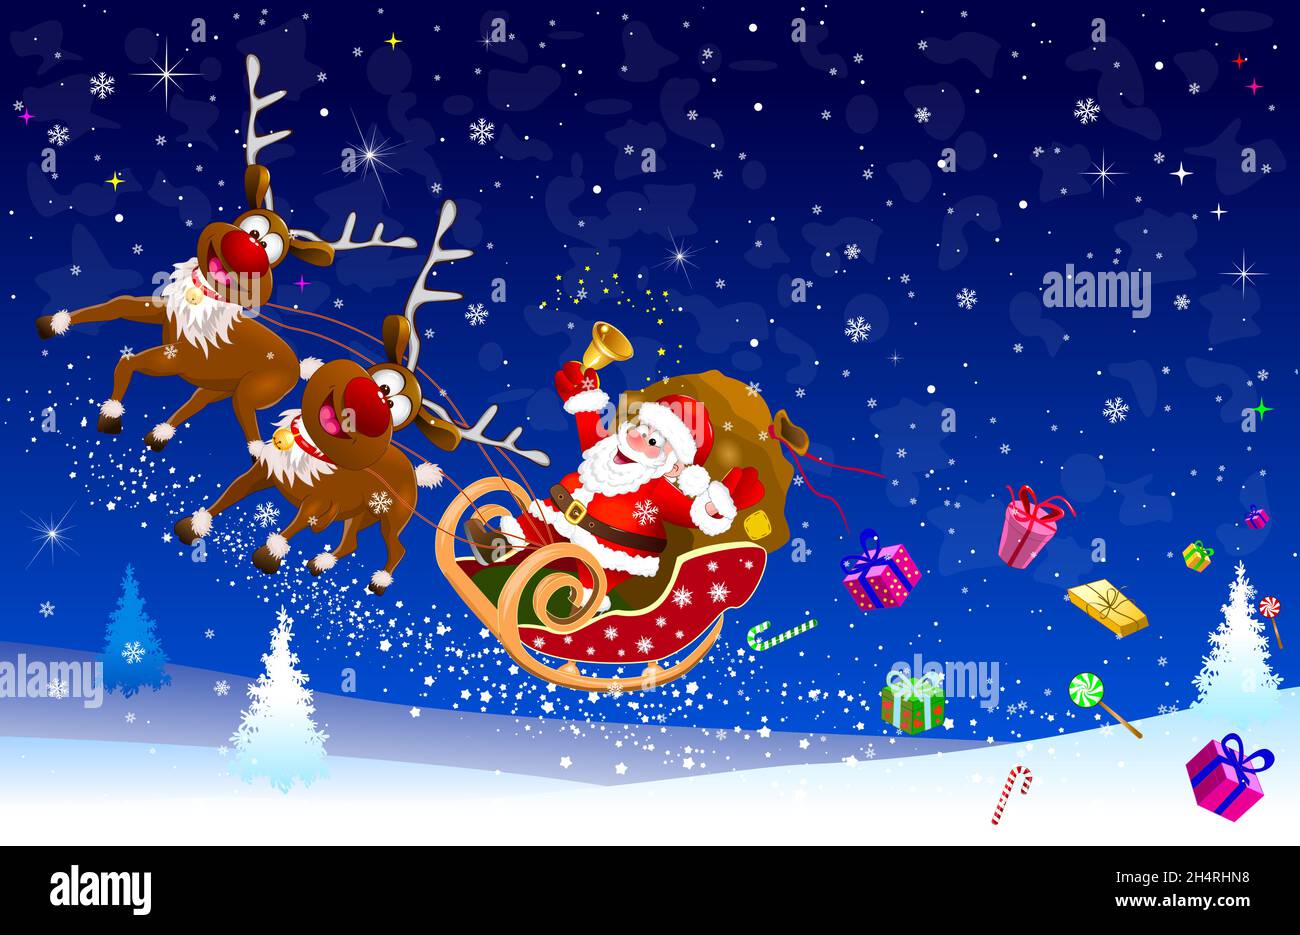 Santa Claus on a sleigh pulled by reindeer flies across the sky and scatters gifts. Santa Claus with gifts on a sleigh on Christmas Eve. Stock Vector